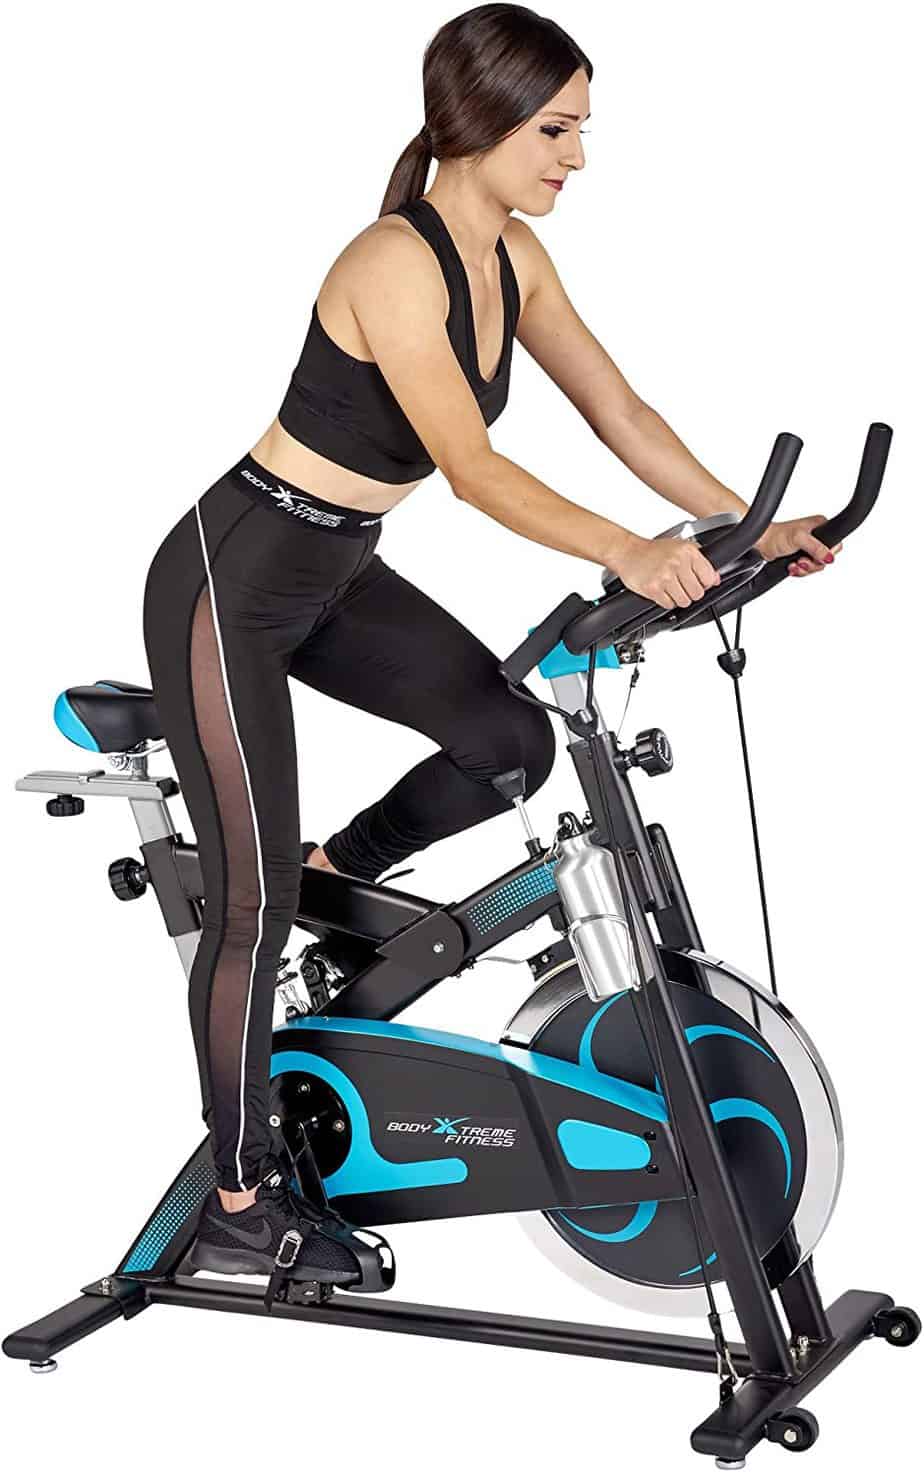 A lady is excercising with the Body Xtreme Fitness Bundle BXF004 Exercise Bike